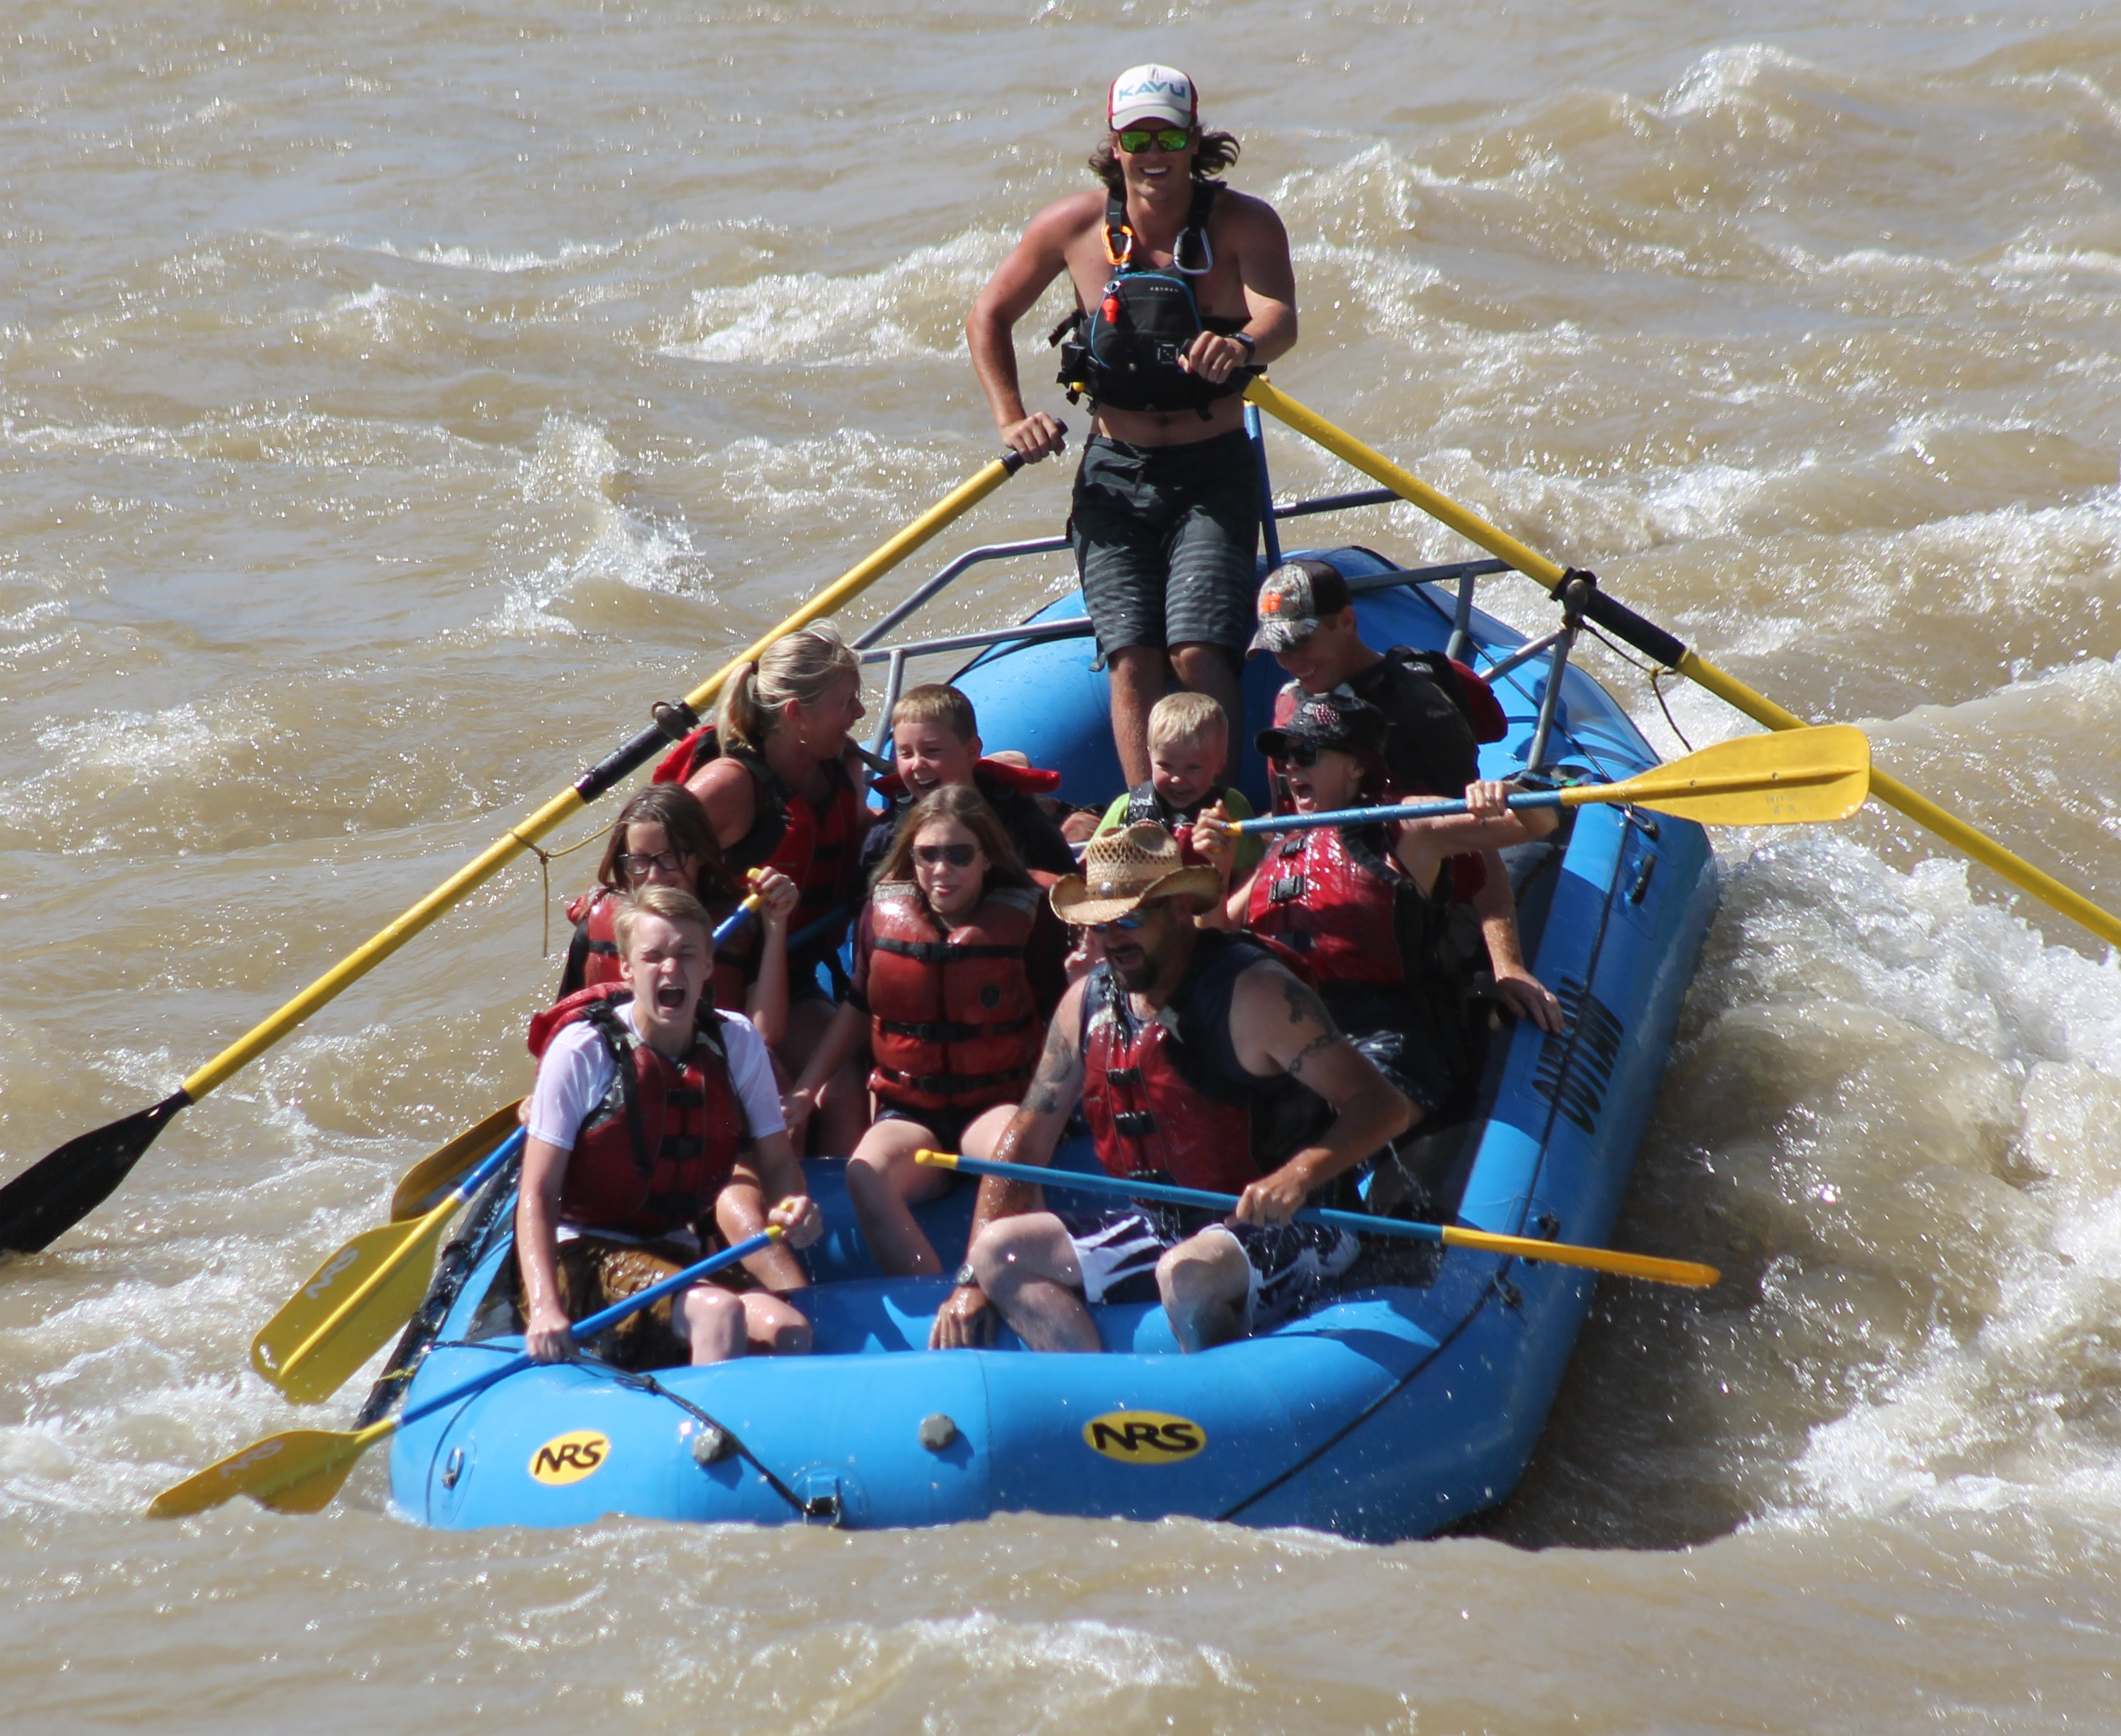 People on a raft in white water